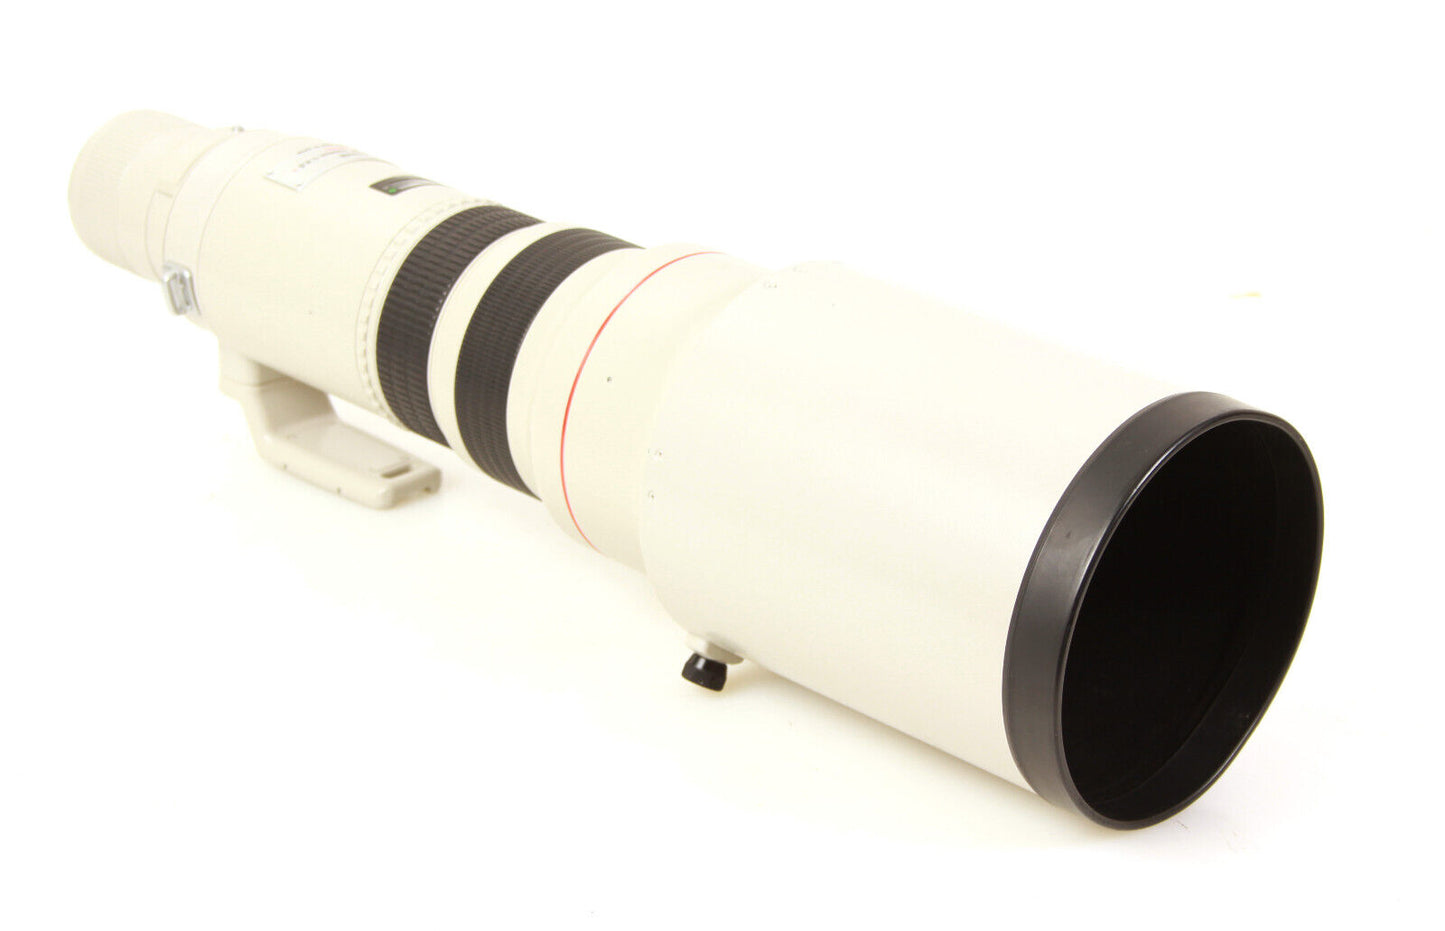 Canon EF 500mm F/4.5 L Ultrasonic Lens With Hard Case Made In Japan